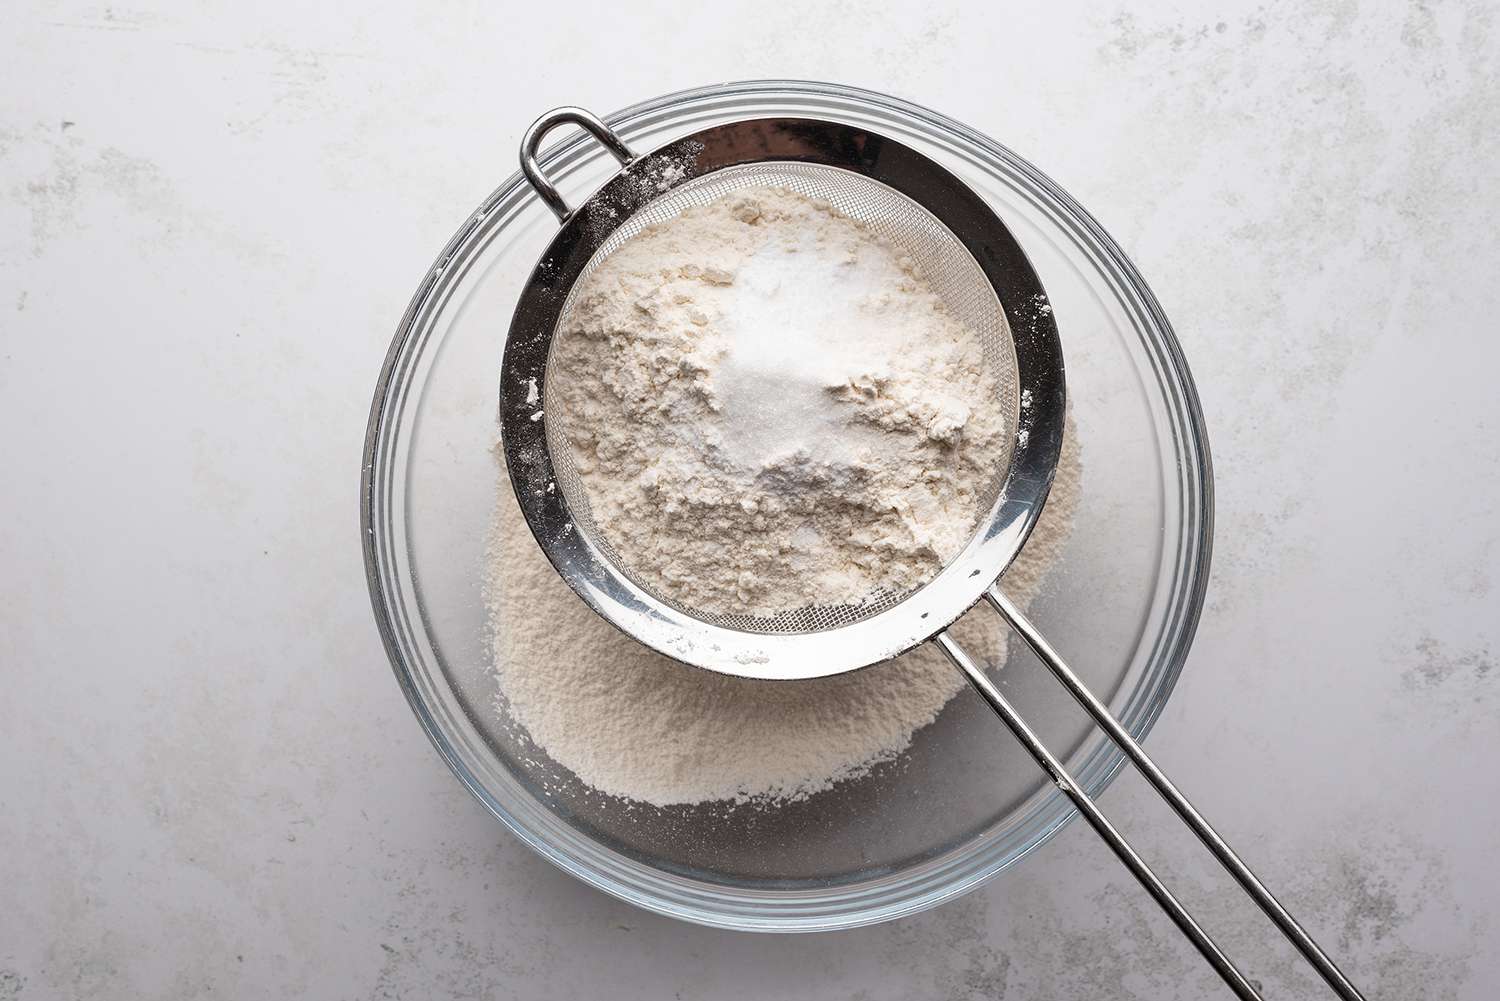 Flour, baking soda, and salt sifted into a glass bowl 